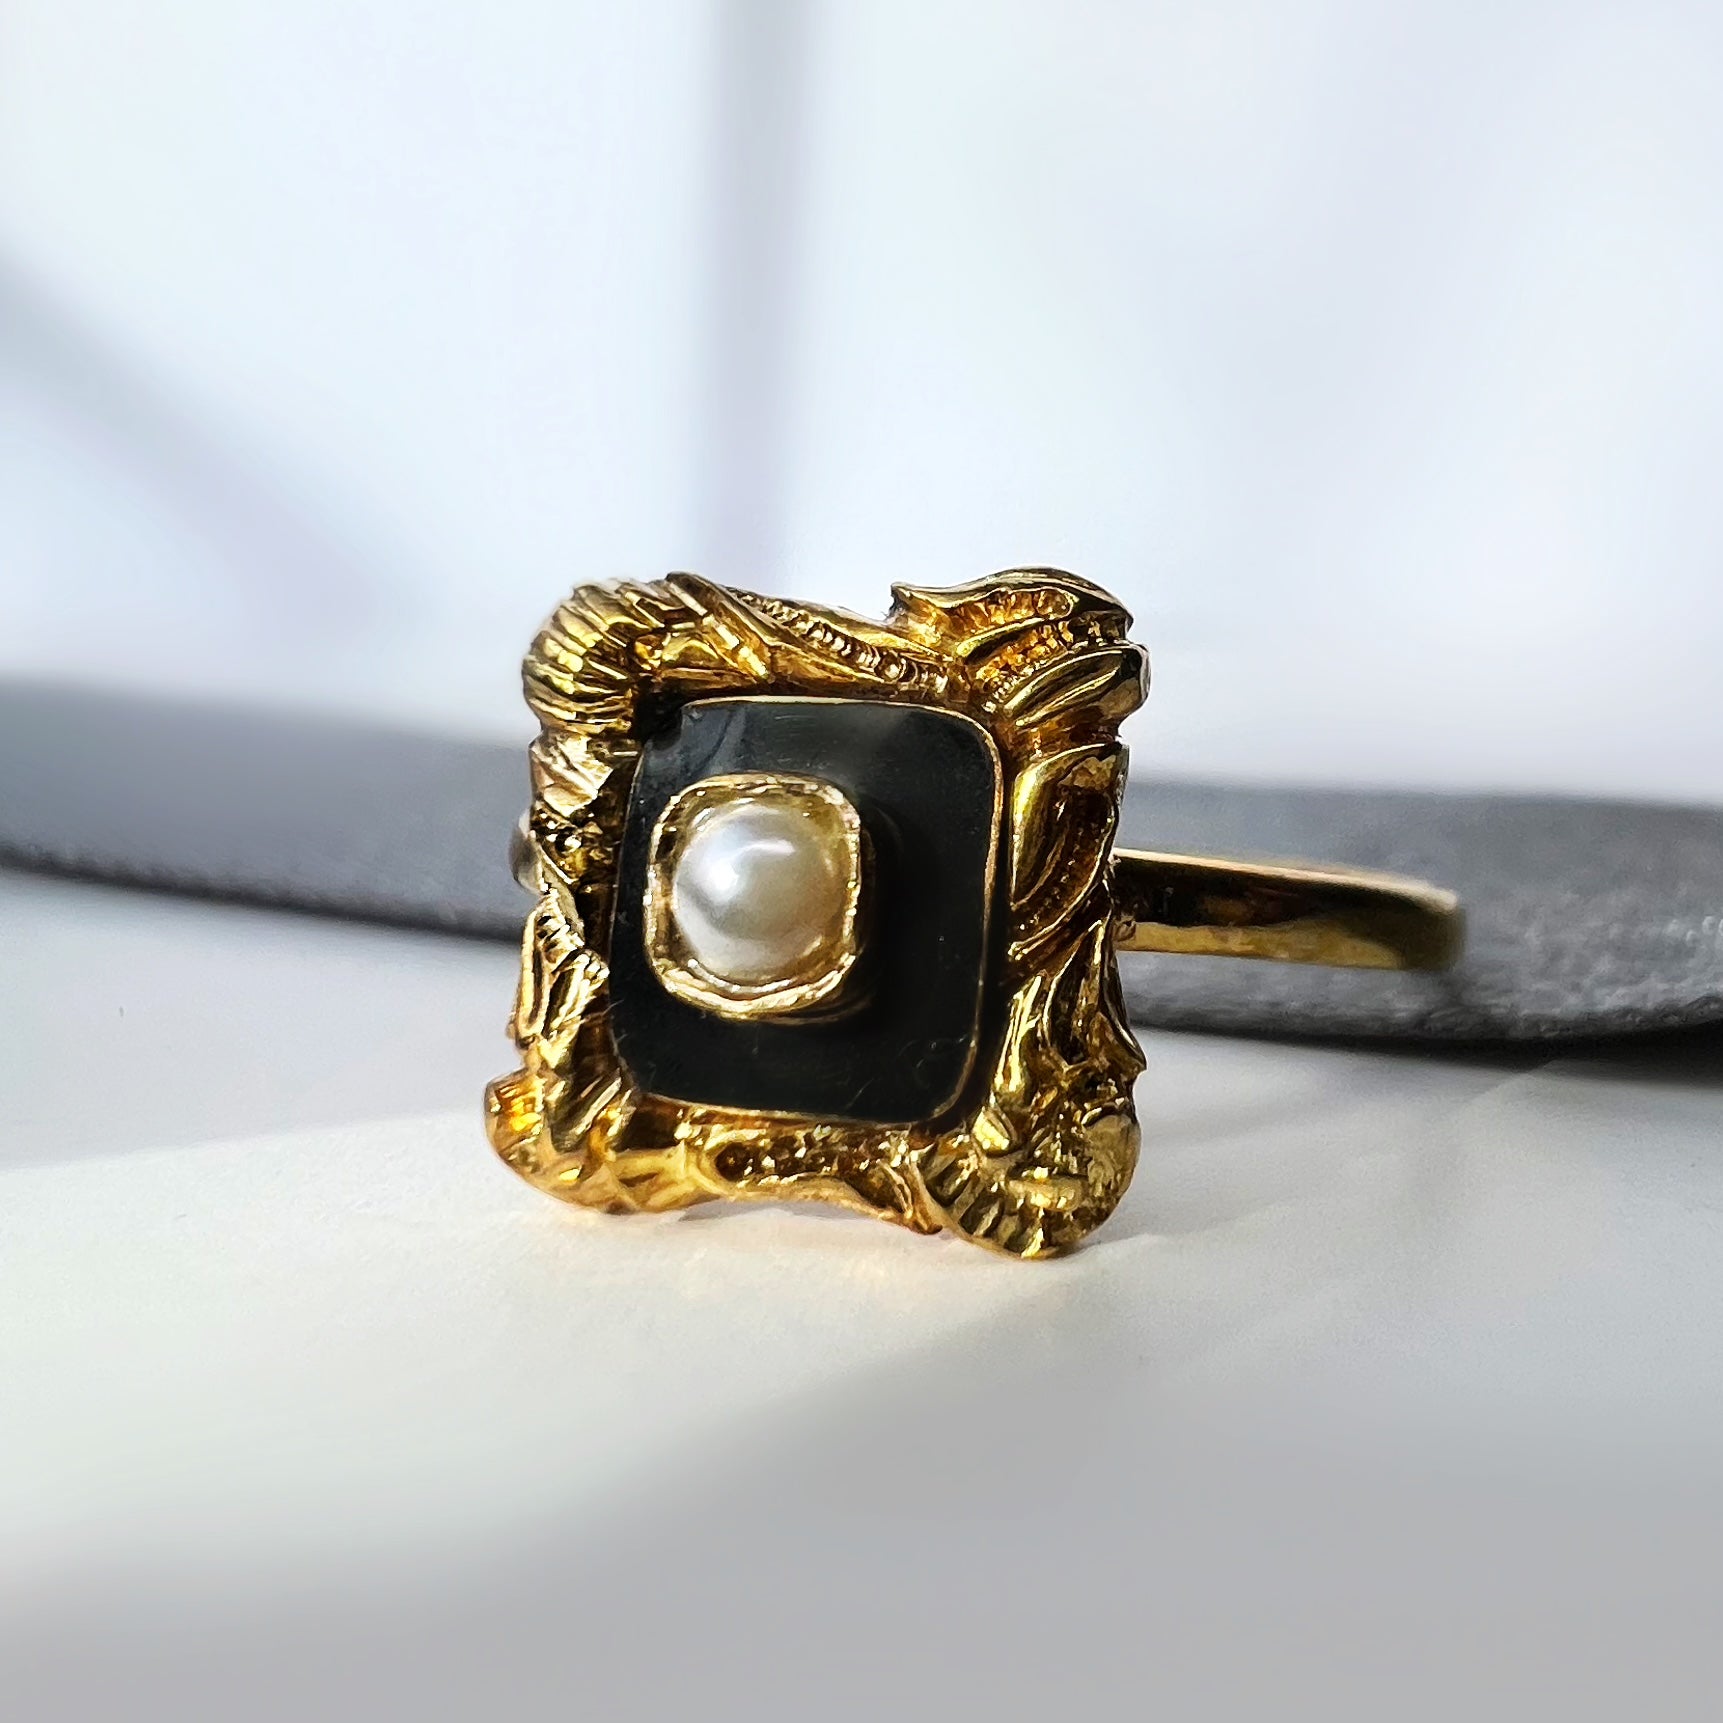 Antique Enamel, Gold and Pearl Ring